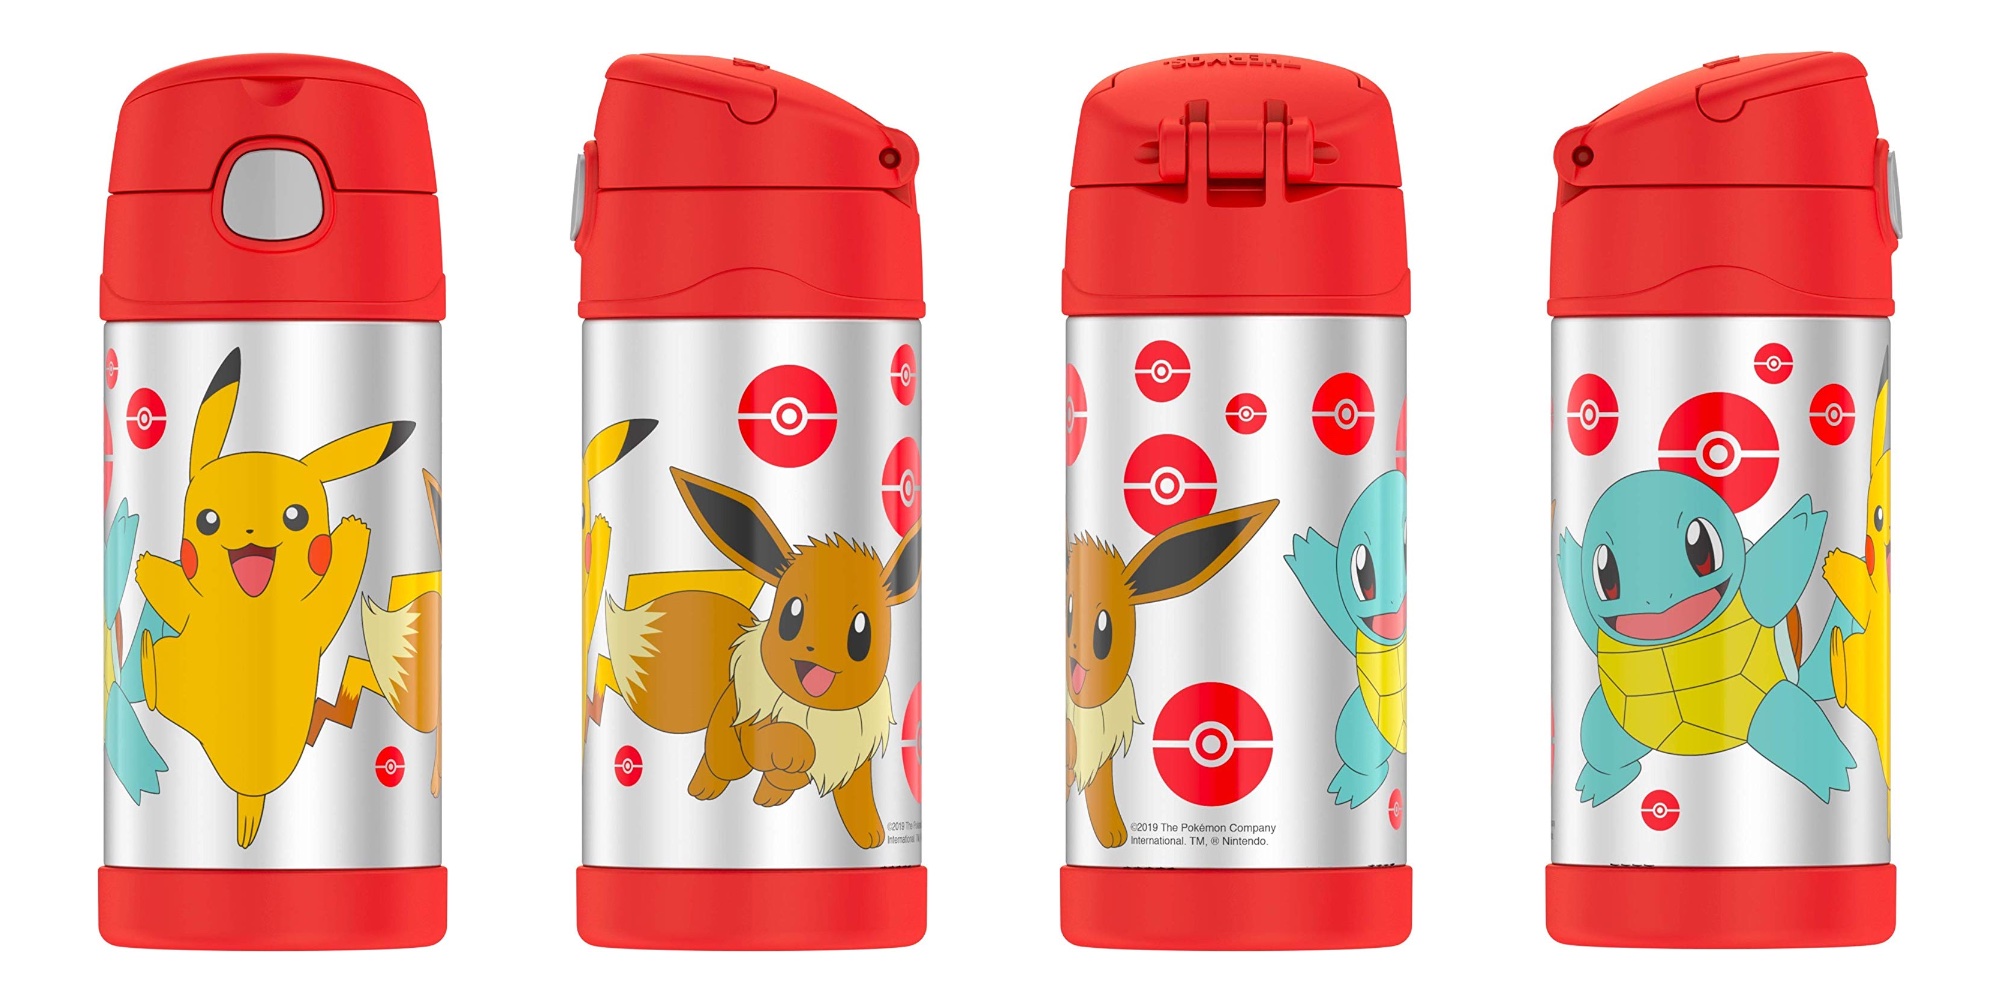 Save 33% on the Pokémon Thermos Funtainer Insulated Bottle at a low of $12